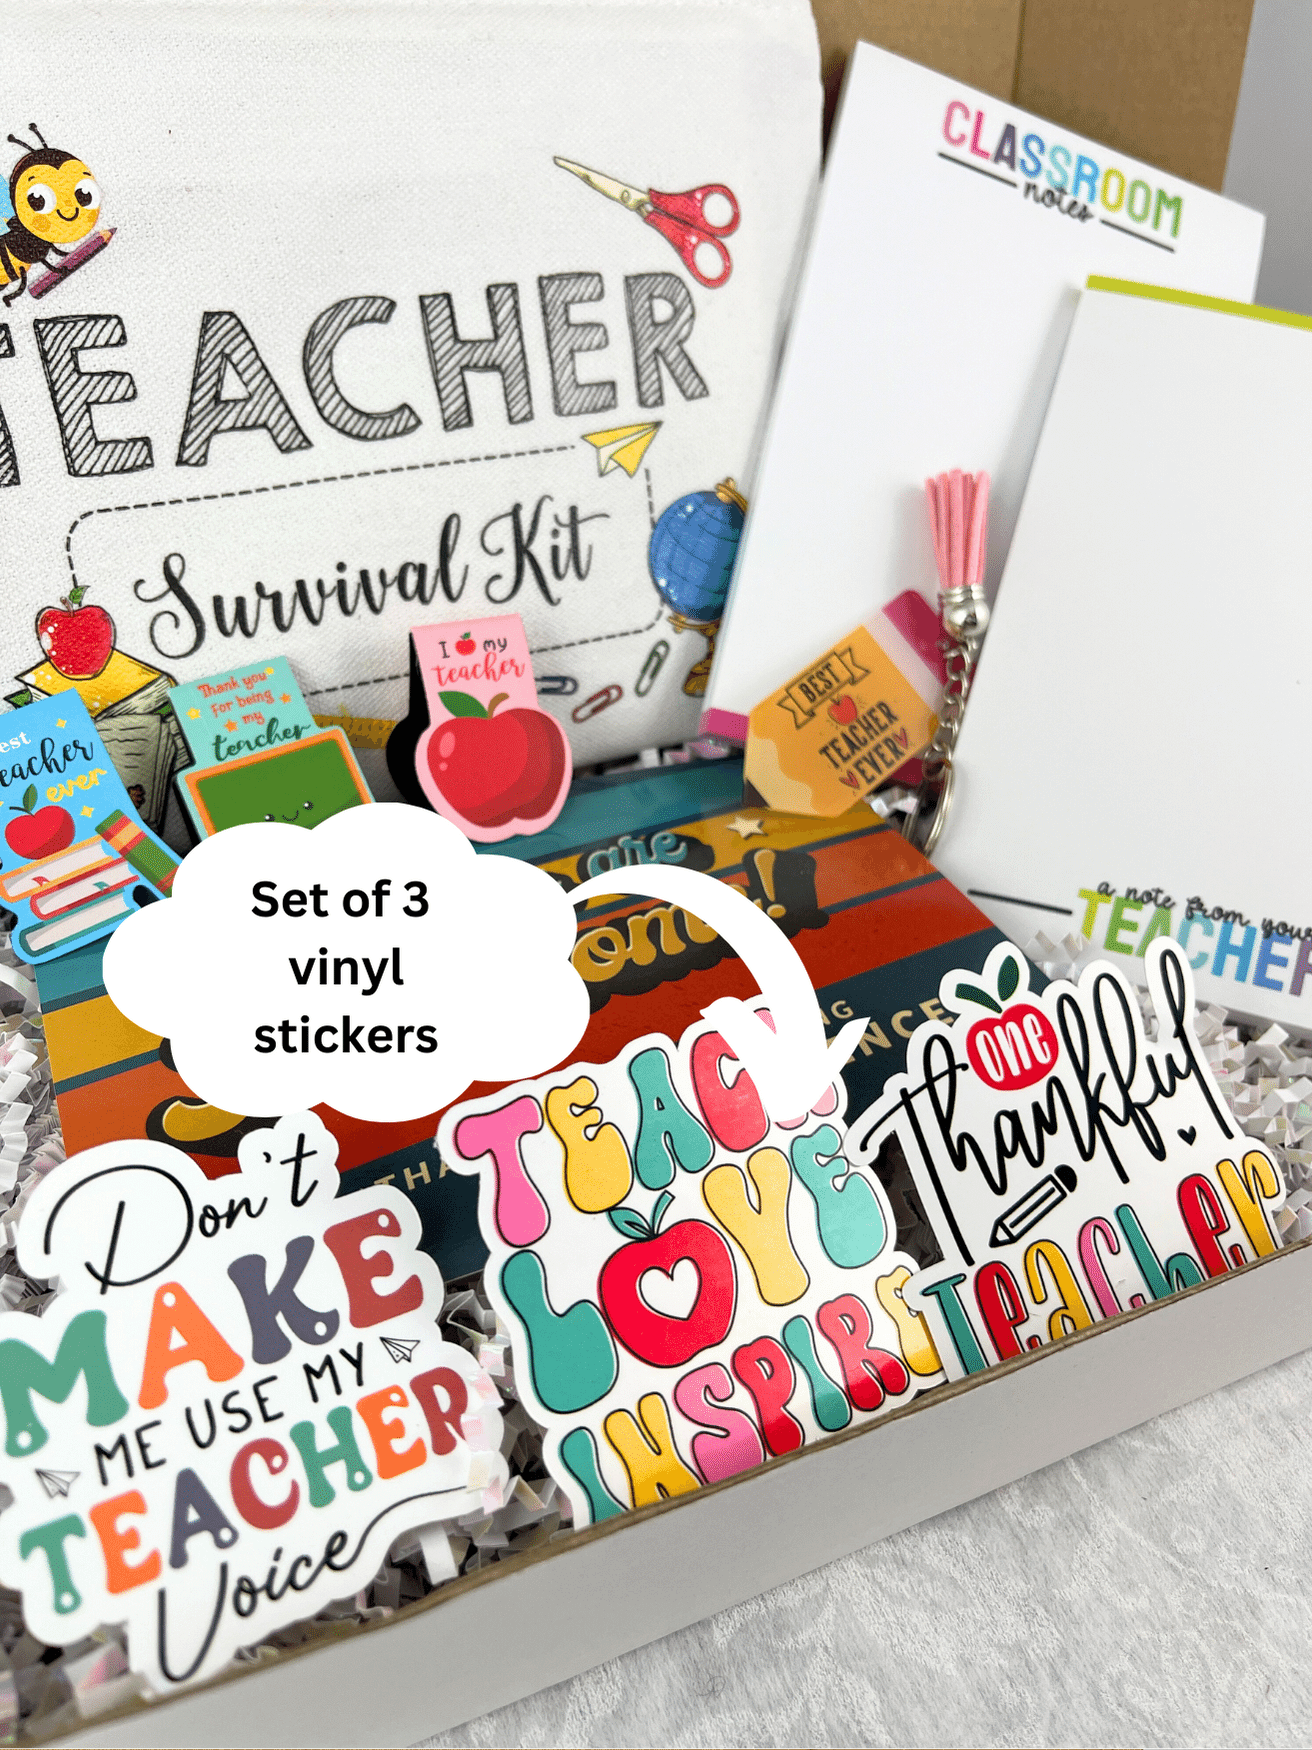 Last Minute DIY Teacher Gifts They'll LOVE! - Your Modern Family